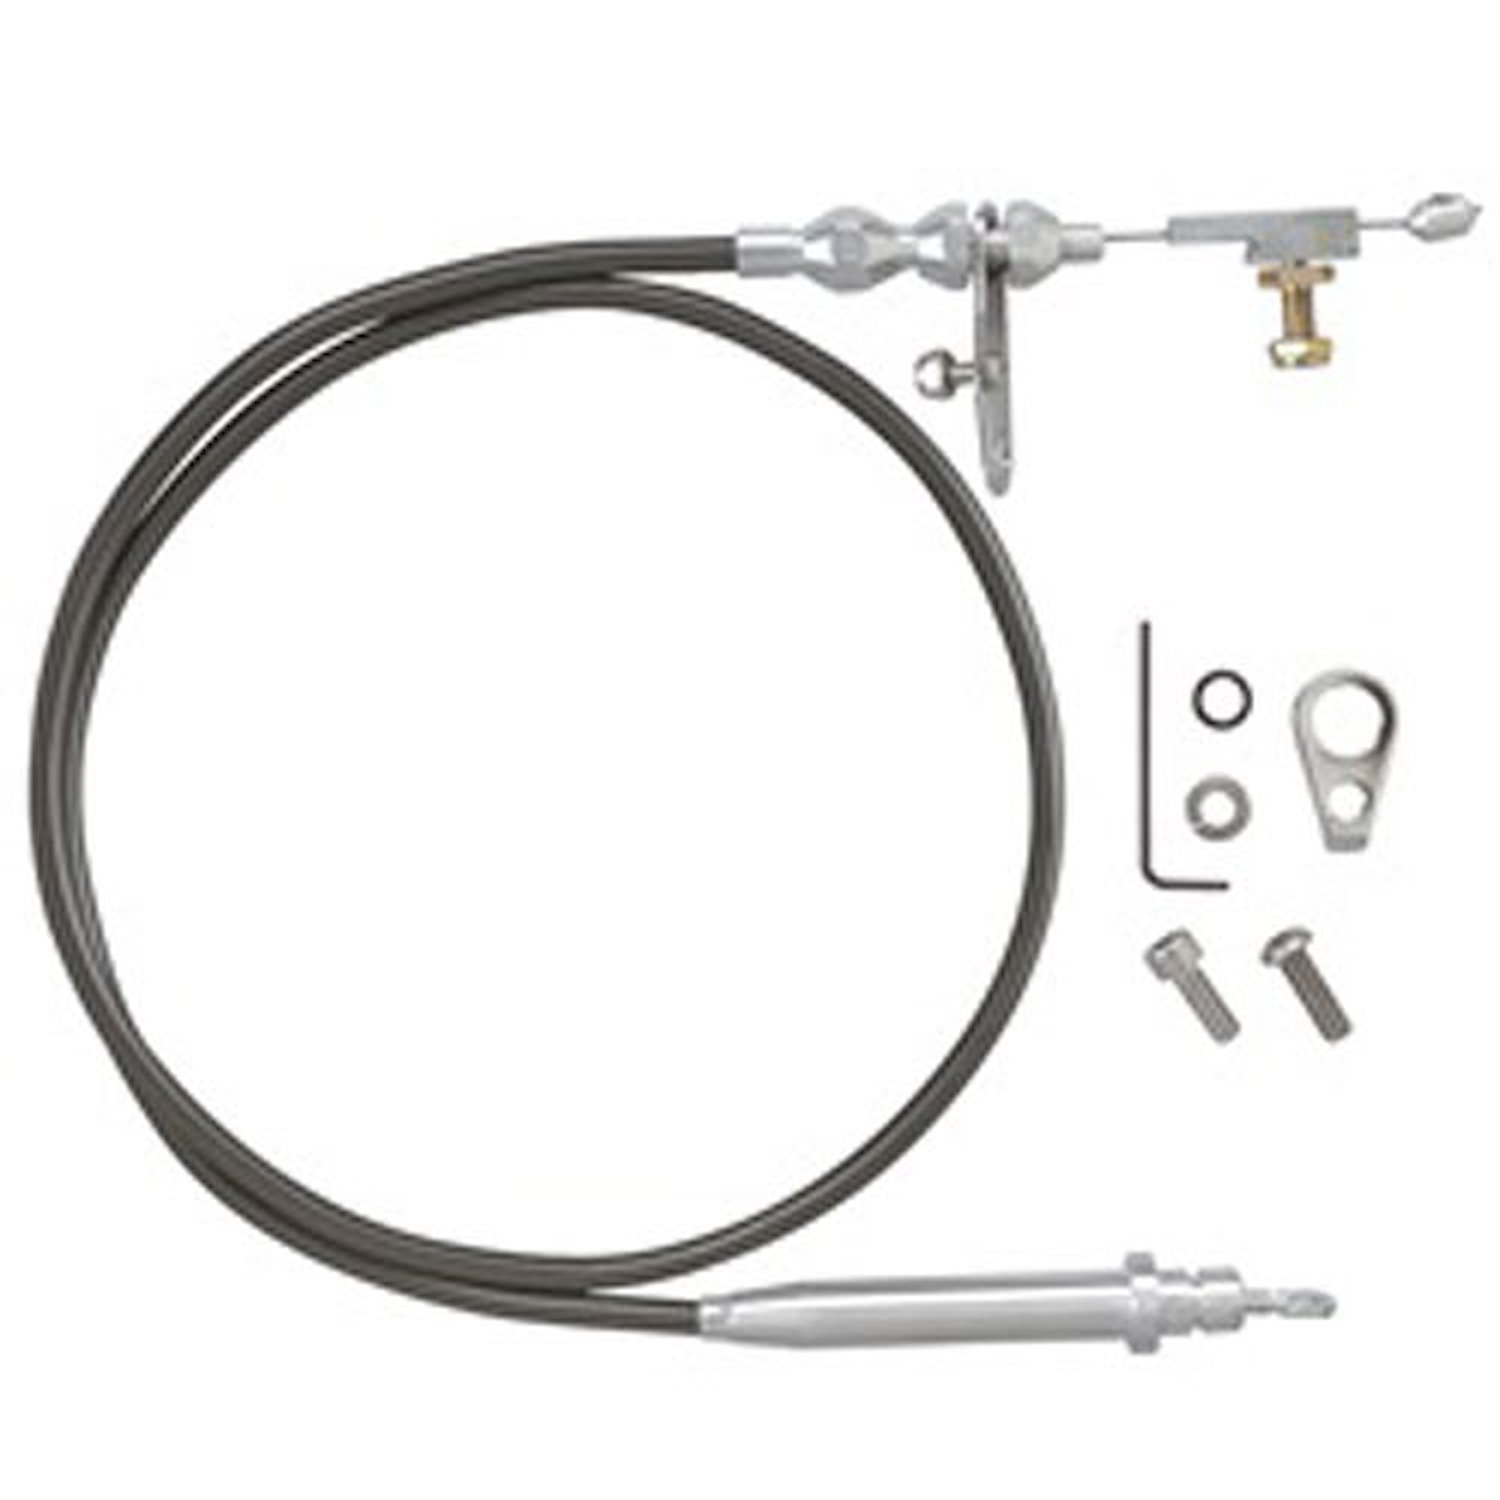 Hi-Tech Stainless Steel Braided Kickdown Cable Kit, GM TH700-R4